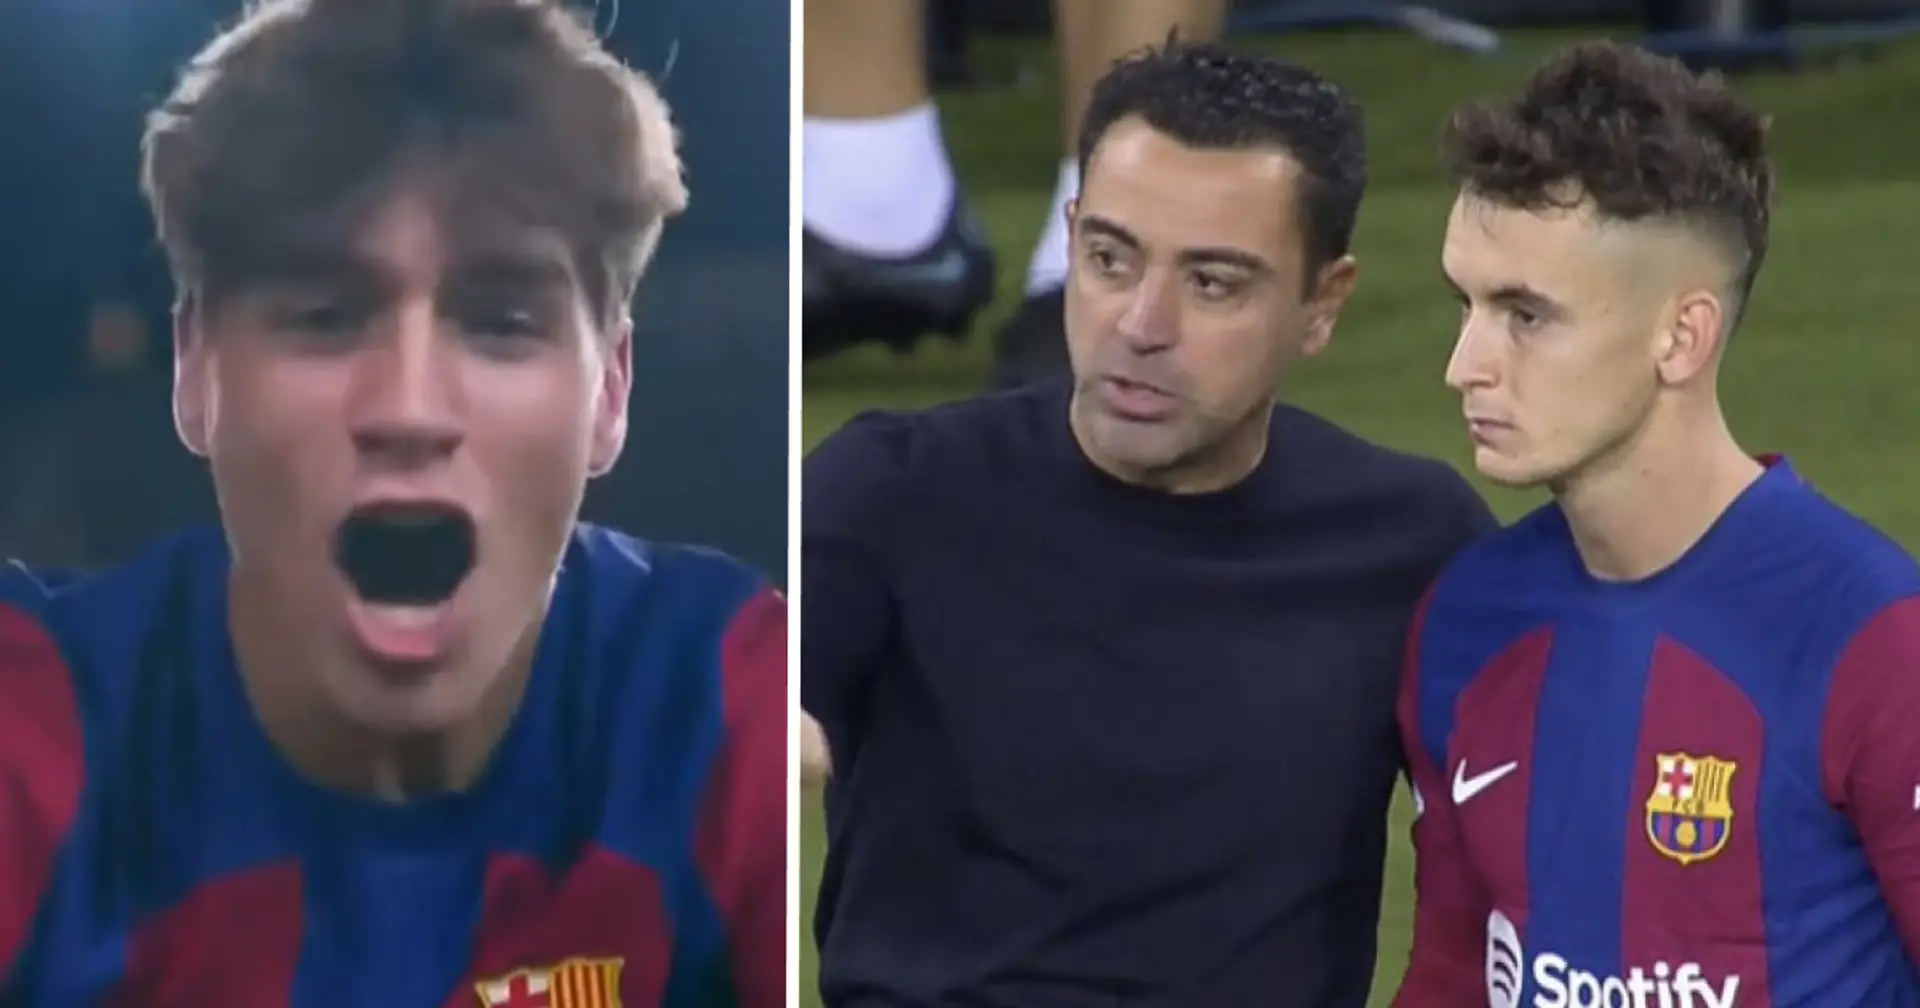 7 under-19 players registered in Barca's Champions League squad, 3 are already well-known